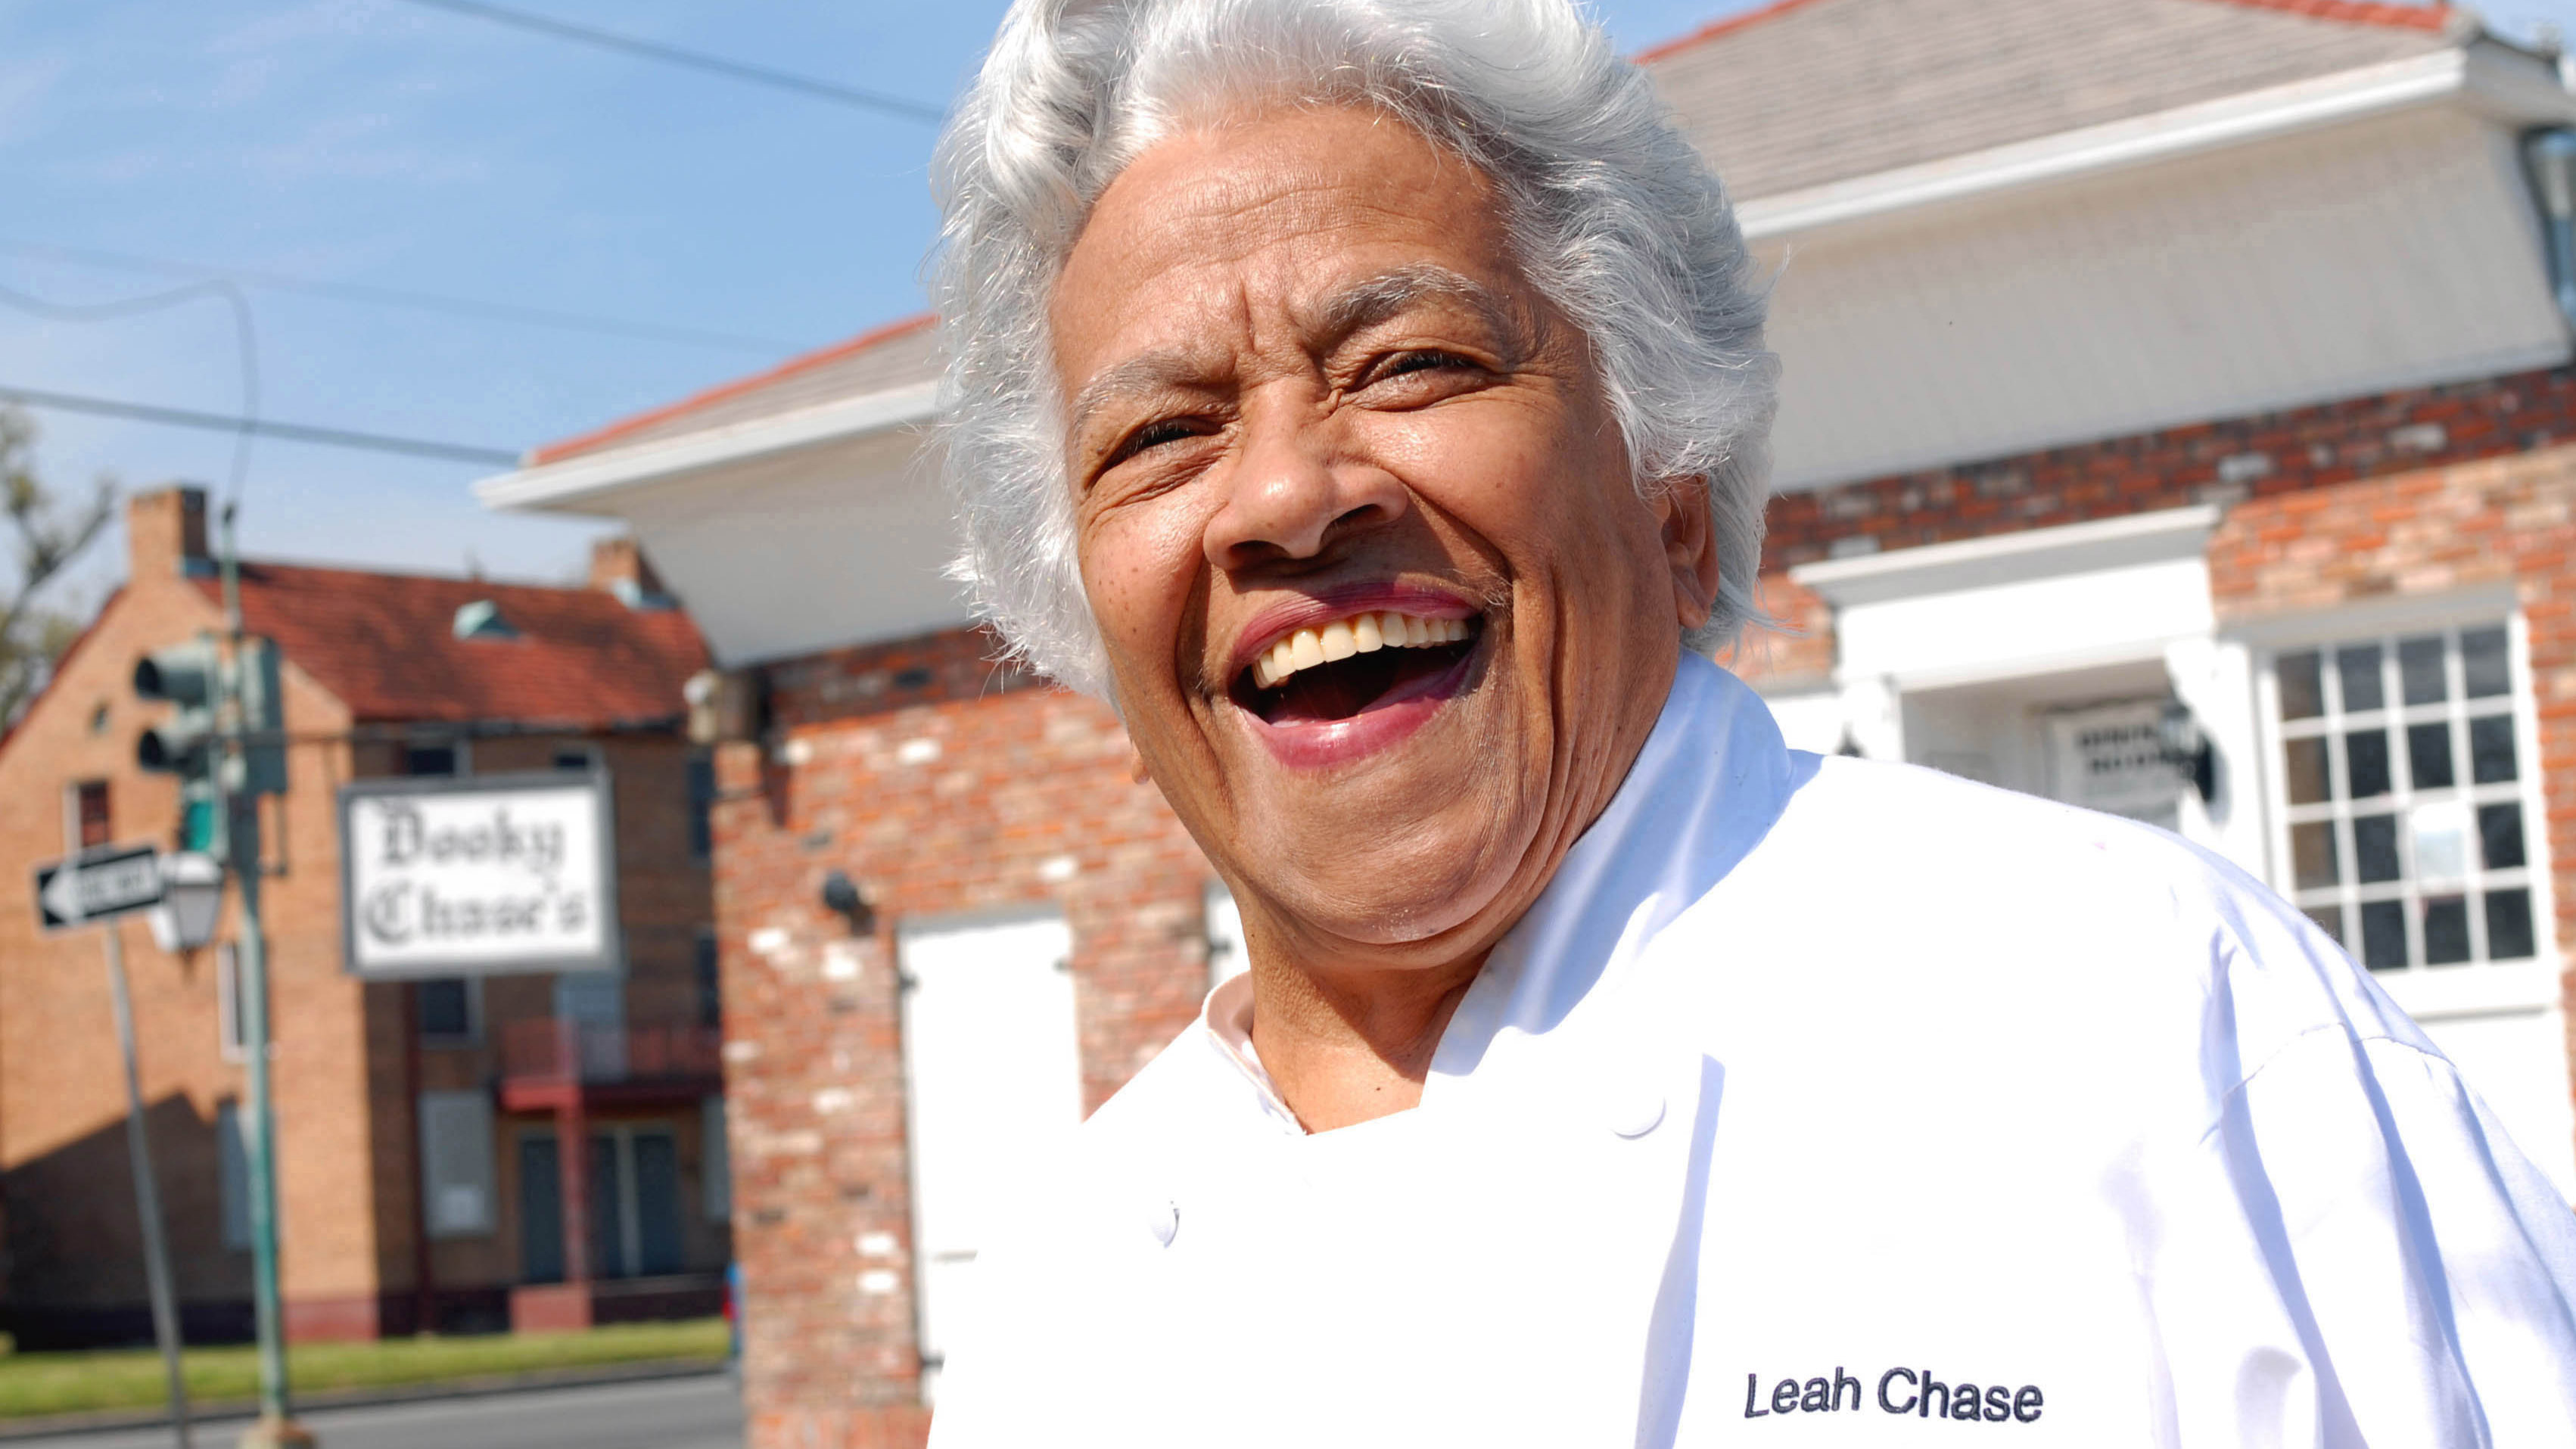 Chef and owner Leah Chase. Credit: Cheryl Gerber.